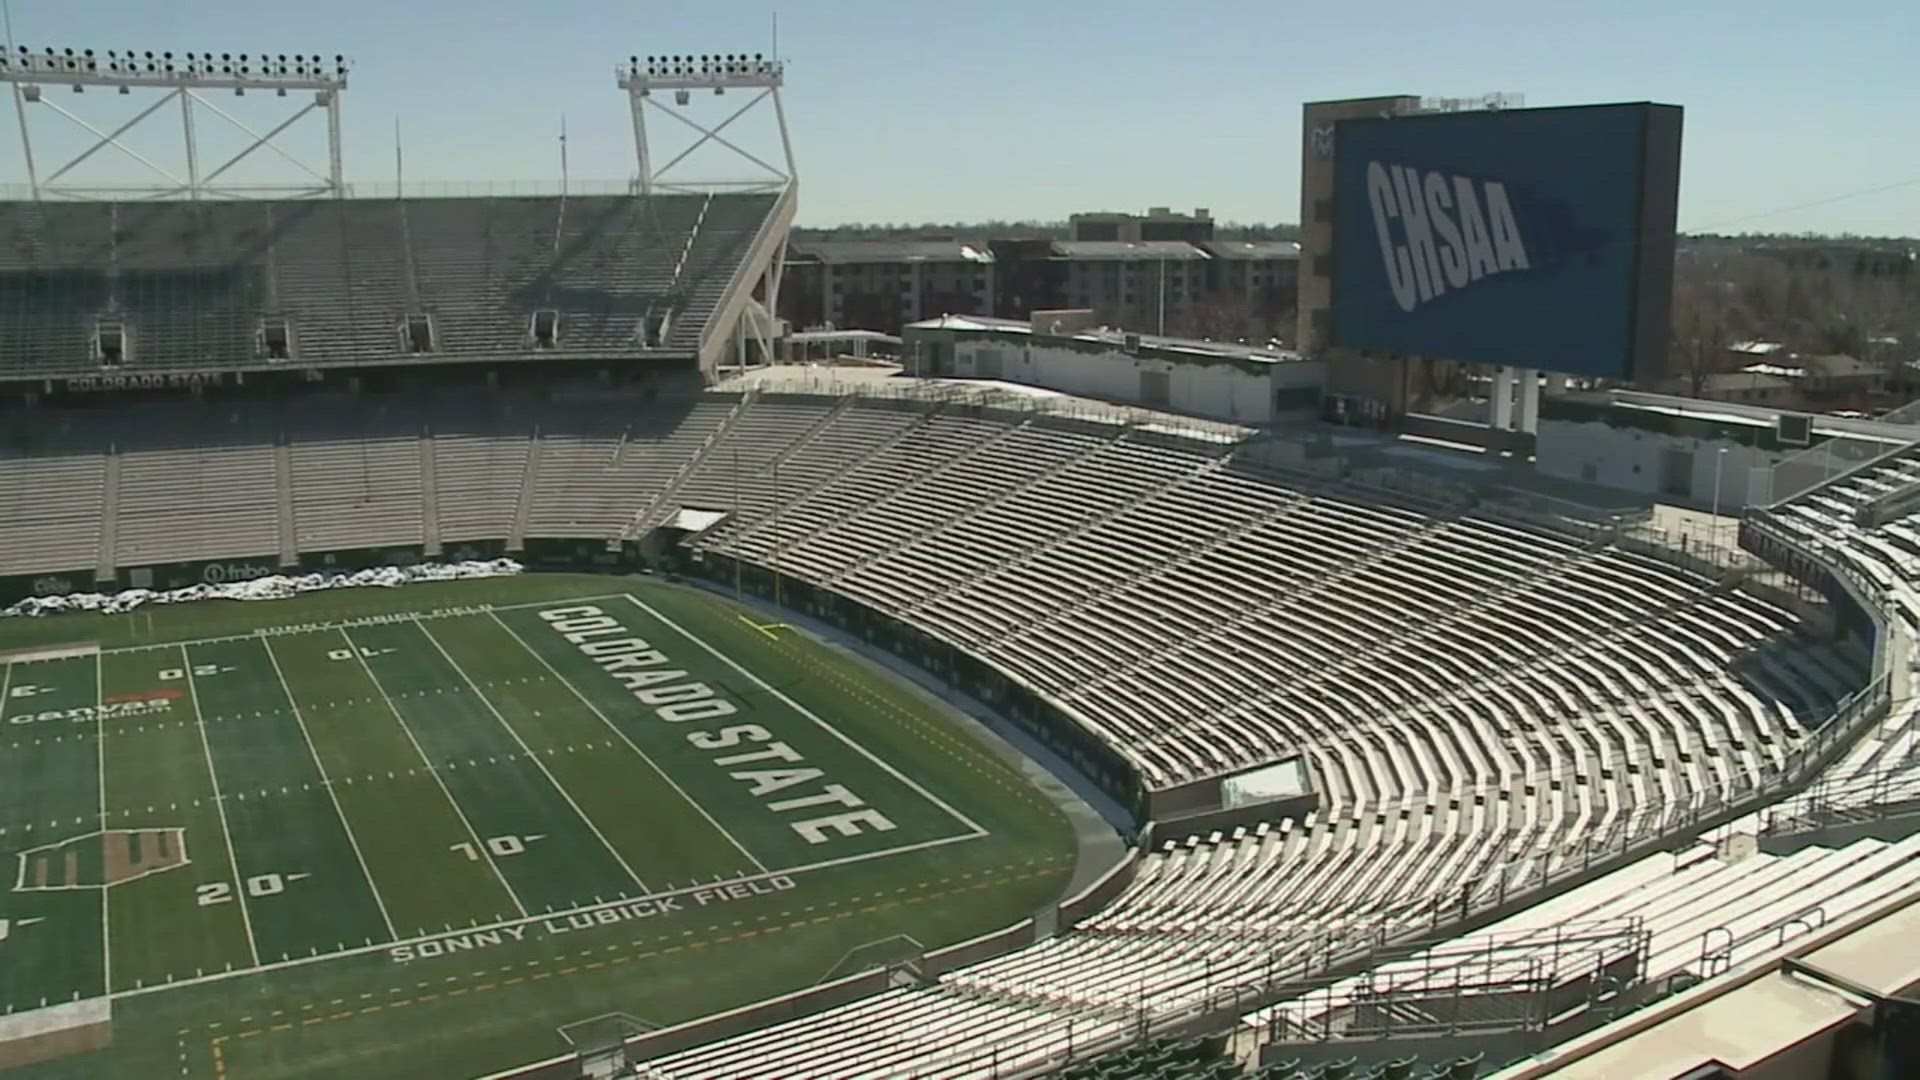 A big change of venue is coming for some of the state high school football championship games